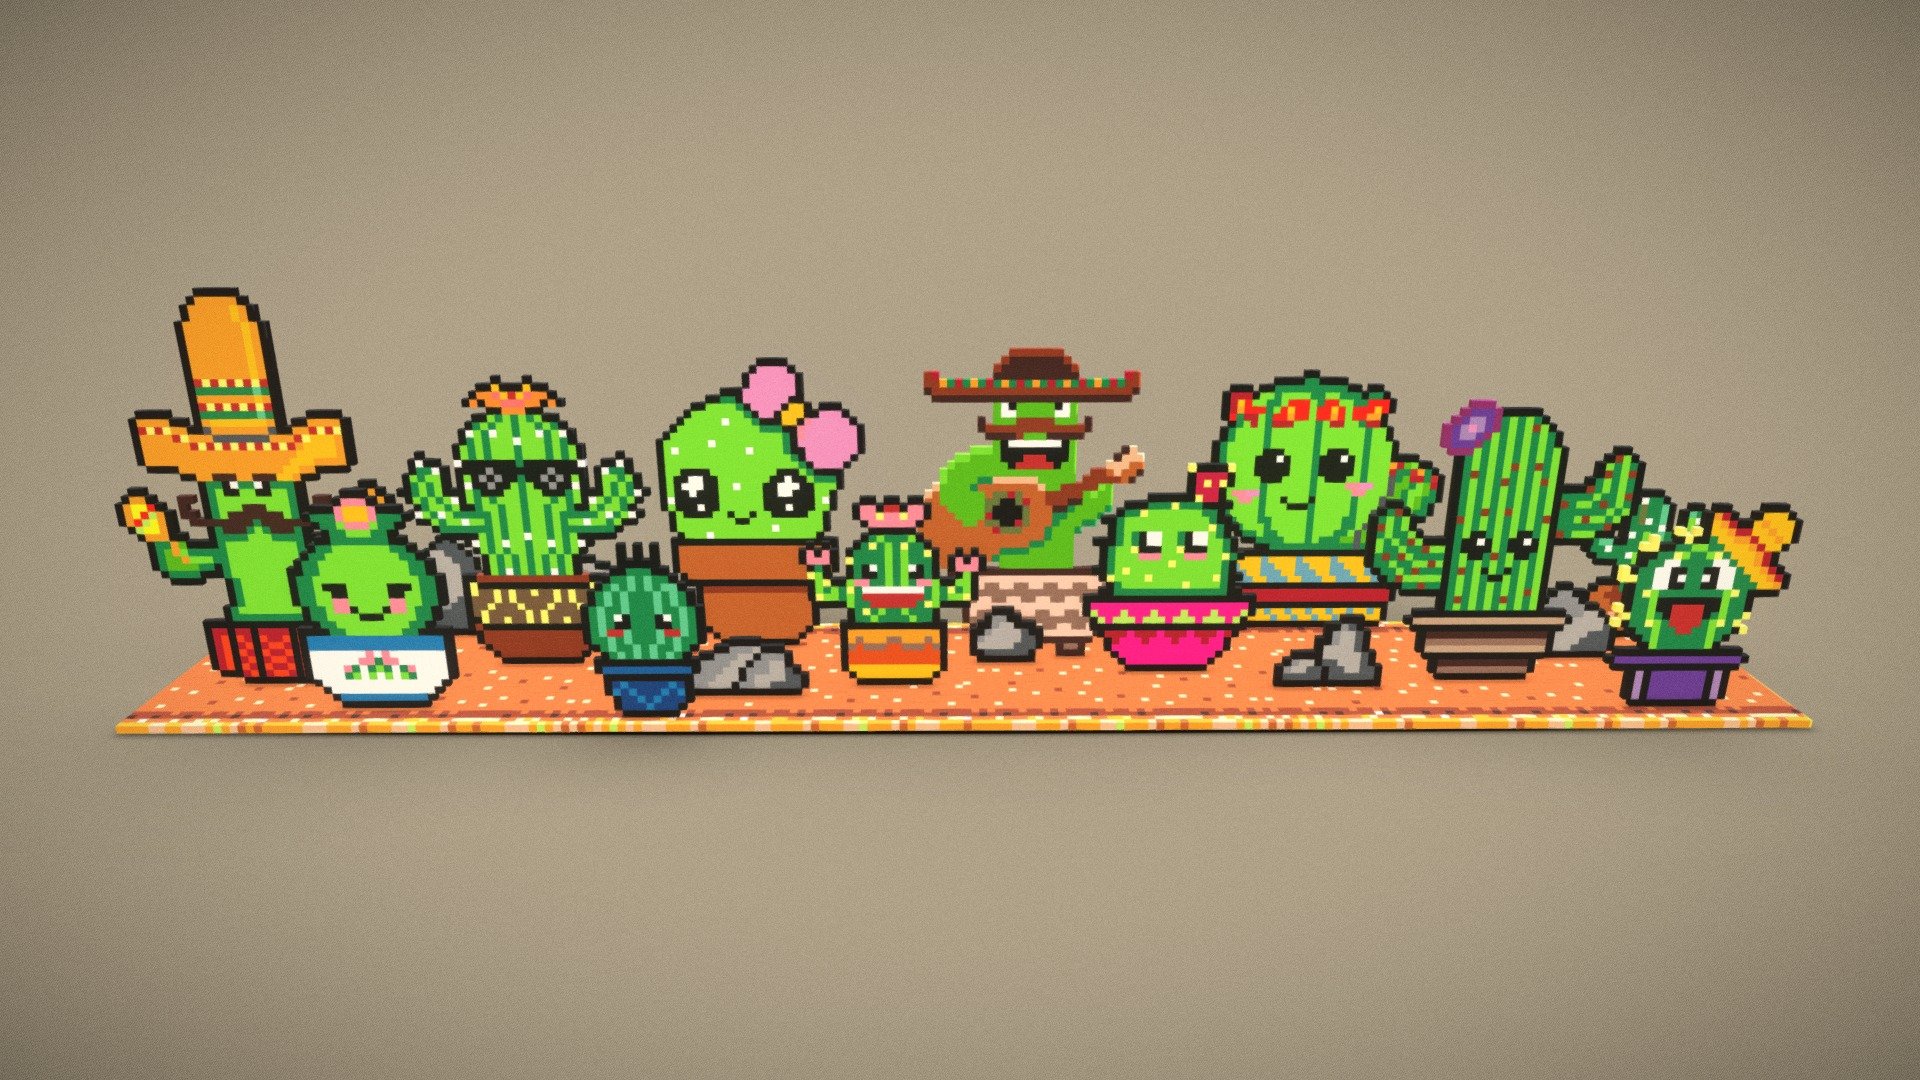 Pixel / Voxel Art ready to use!

Cactus (plural cacti, cactuses) is a member of the plant family Cactaceae, this diorama represents them in Kawaii Style!

Kawaii (lovely, loveable, cute or adorable) is the culture of cuteness in Japan. It can refer to items, humans and non-humans that are charming, vulnerable, shy and childlike.

The cuteness culture, or kawaii aesthetic, has become a prominent aspect of Japanese popular culture, entertainment, clothing, food, toys, personal appearance, and mannerisms

Model created with multifunctional design, it has been created with individual cubes (Voxels) to handle completely. Even DYI craft them with Fuse Beads (Hama, Perler, Artkal, etc.), 3D Print or assemble with Construction Blocks (Lego, Megablocks, Everblock, Pix Brix, etc.) , wood blocks or any other material.

Do you like it? I appreciate if you follow us, leave a comment and share with others. Thanks! ;) - Cactus Family Kawaii Pixel / Voxel - Buy Royalty Free 3D model by Código Píxel (@codigopixel) 3d model